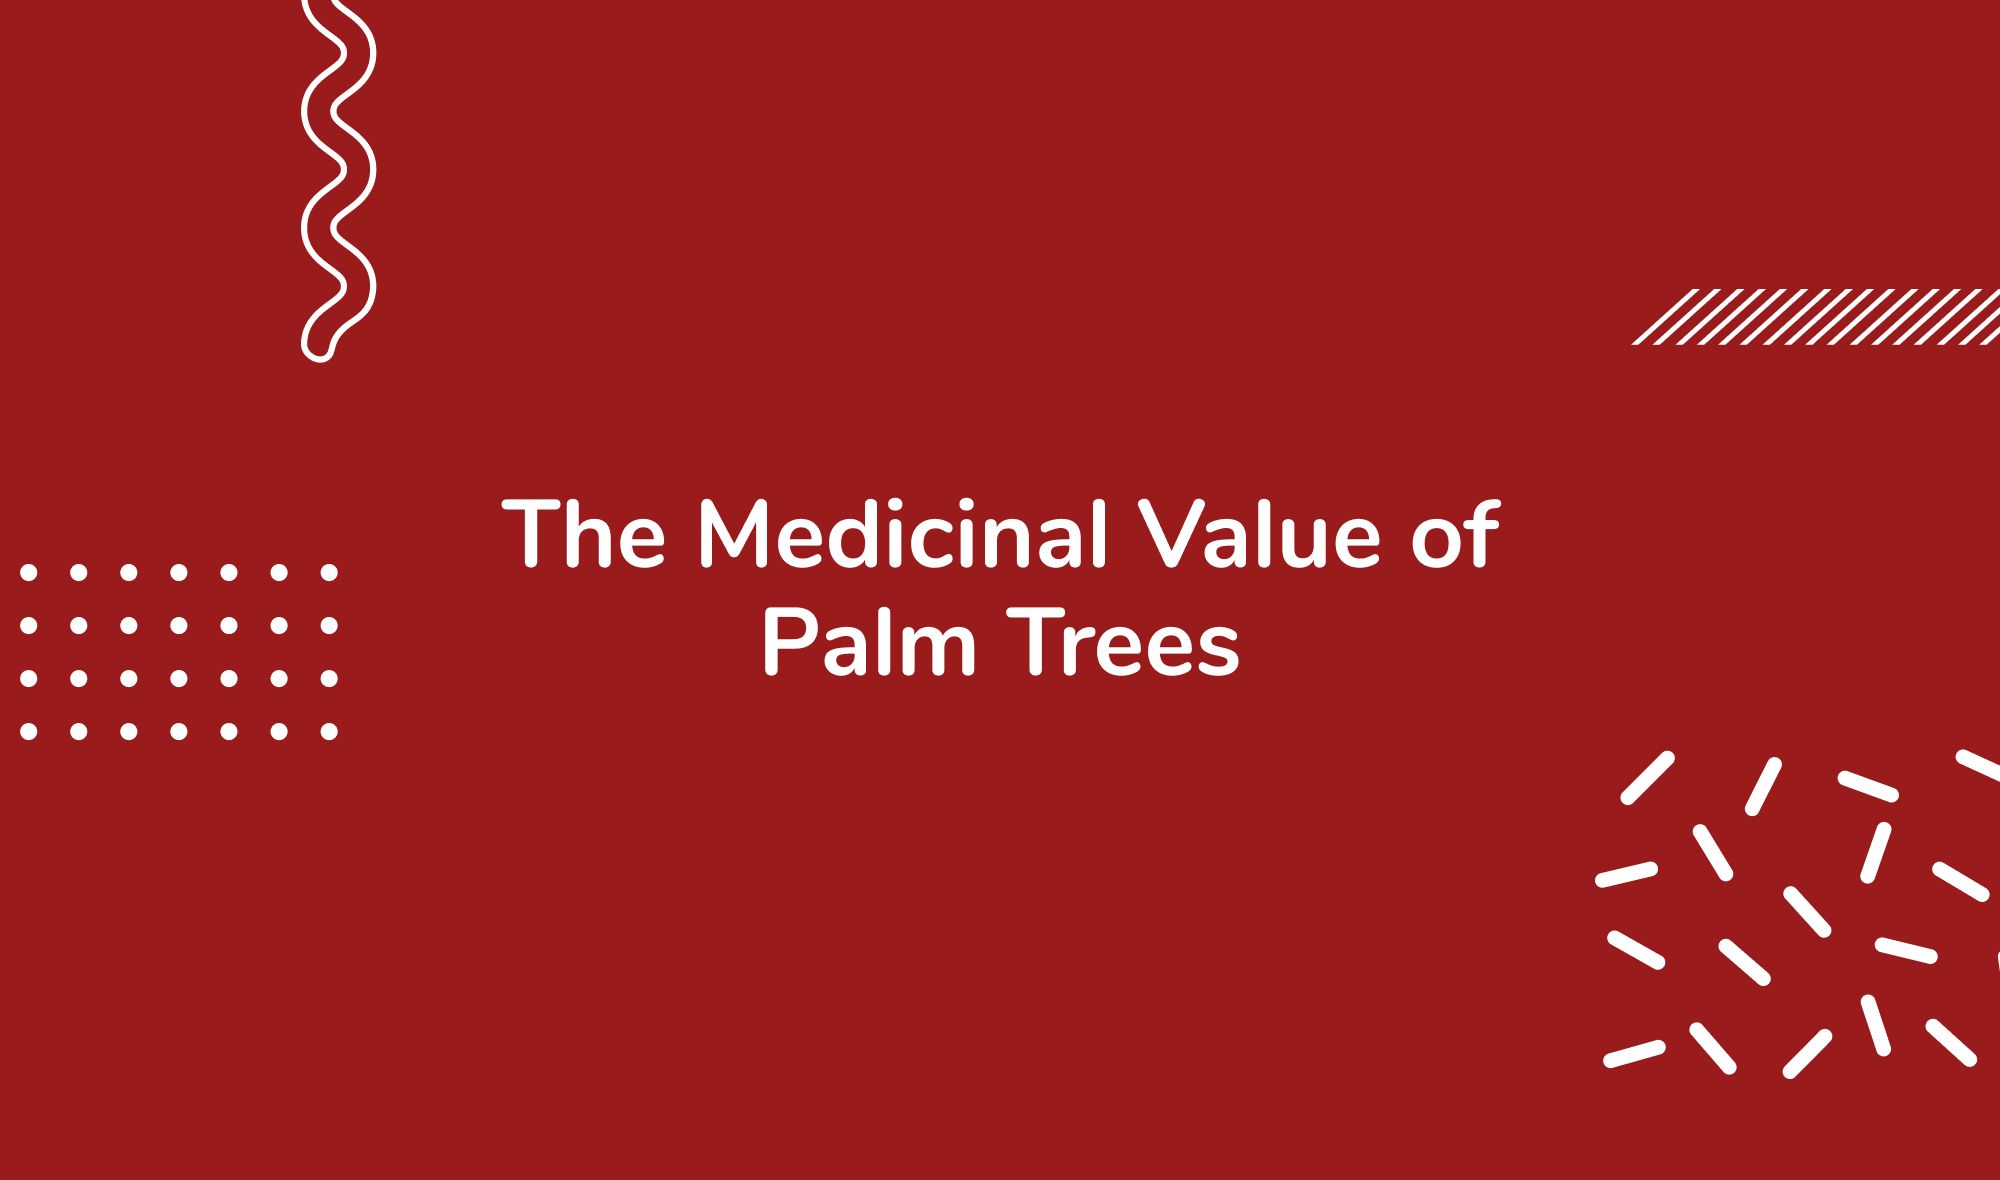 The Medicinal Value of Palm Trees